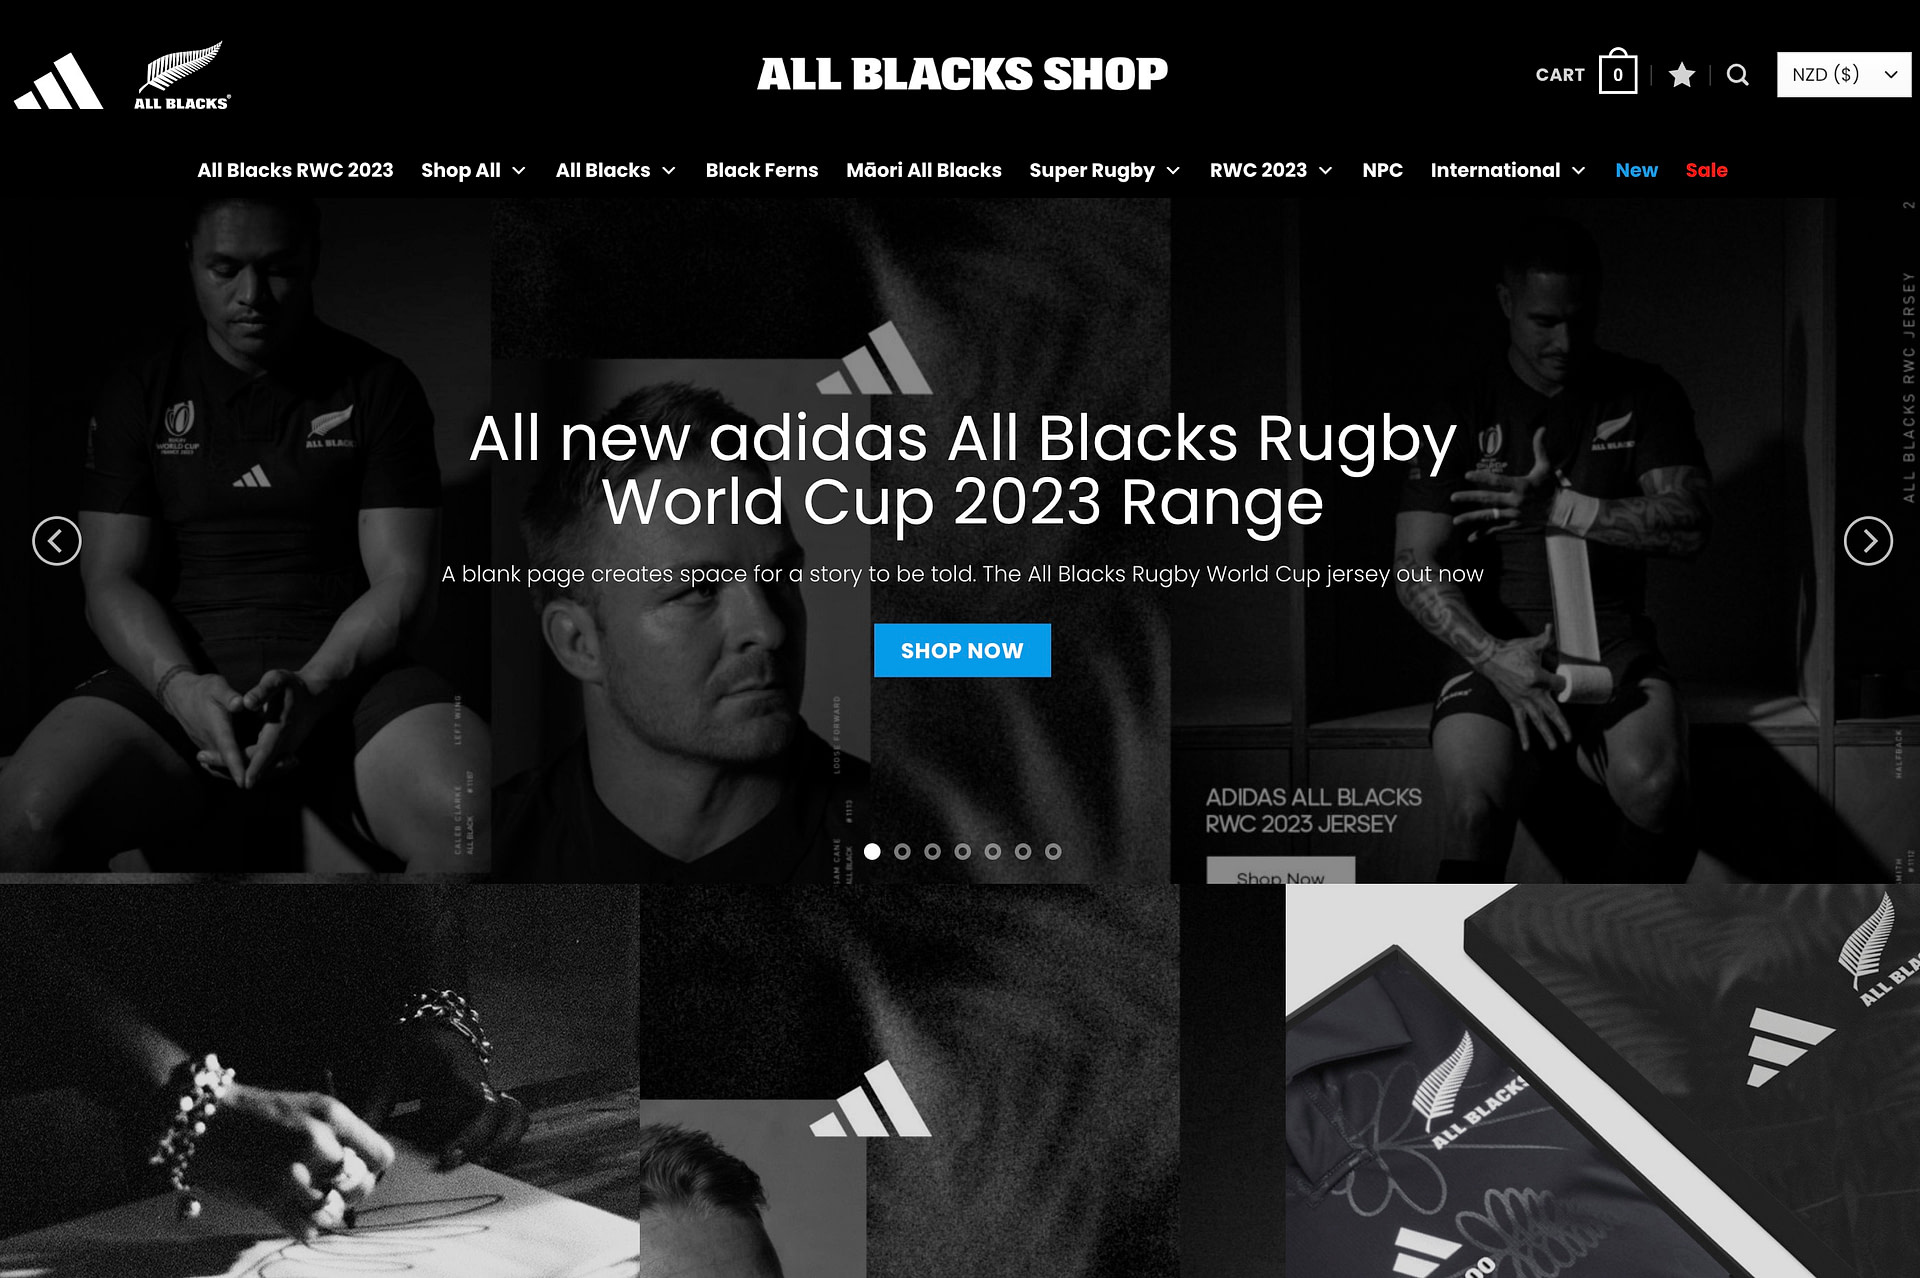 The All Blacks website uses open source ecommerce.